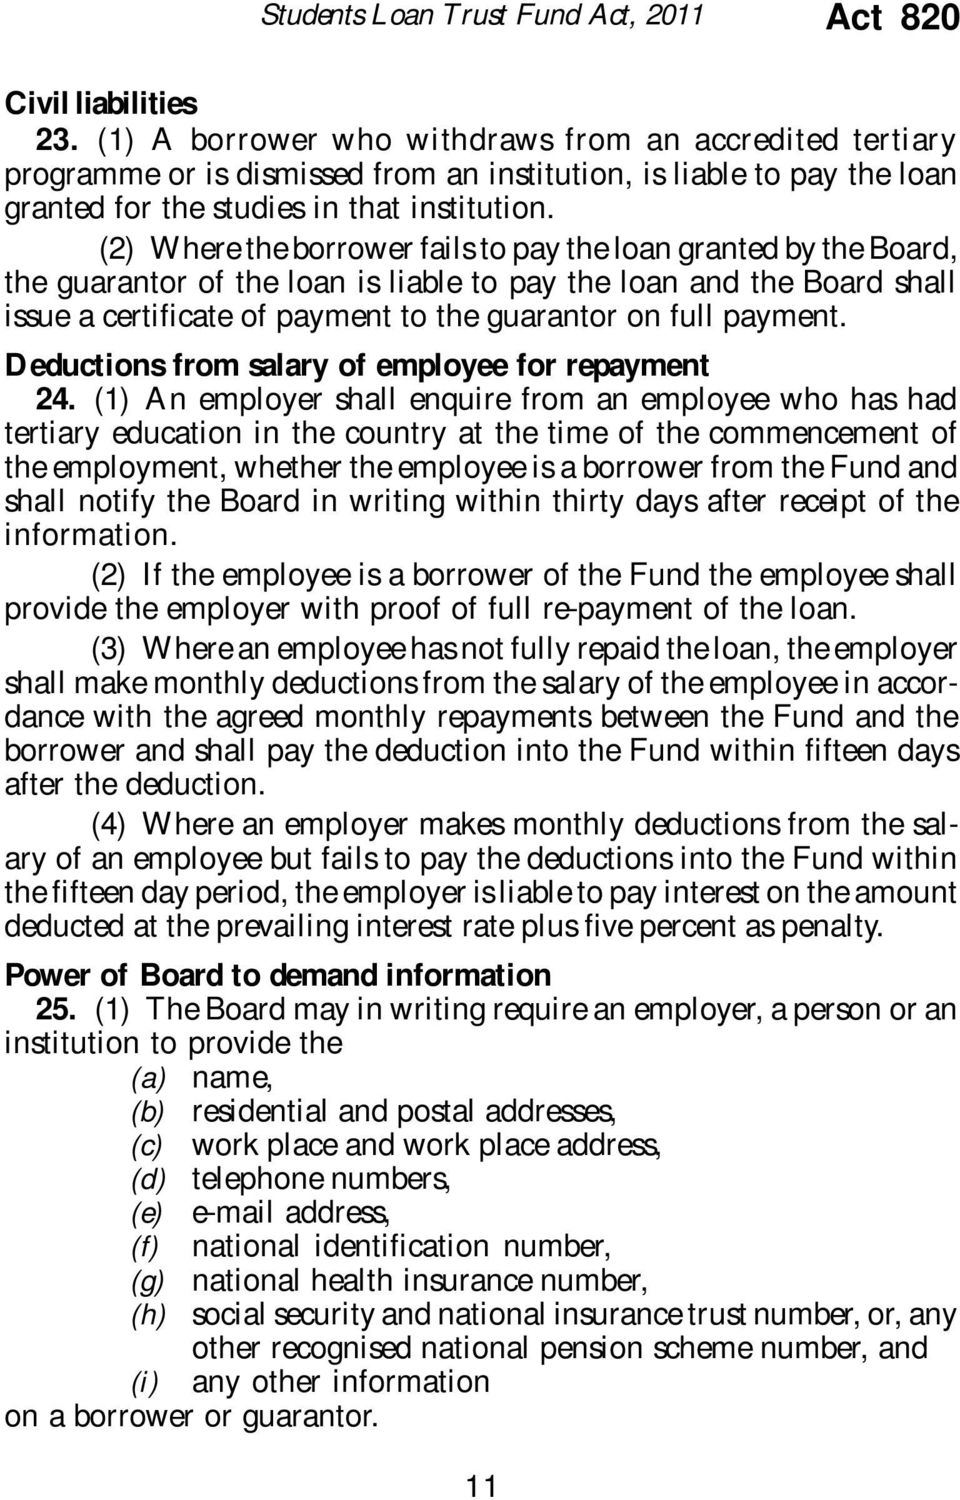 (2) Where the borrower fails to pay the loan granted by the Board, the guarantor of the loan is liable to pay the loan and the Board shall issue a certificate of payment to the guarantor on full